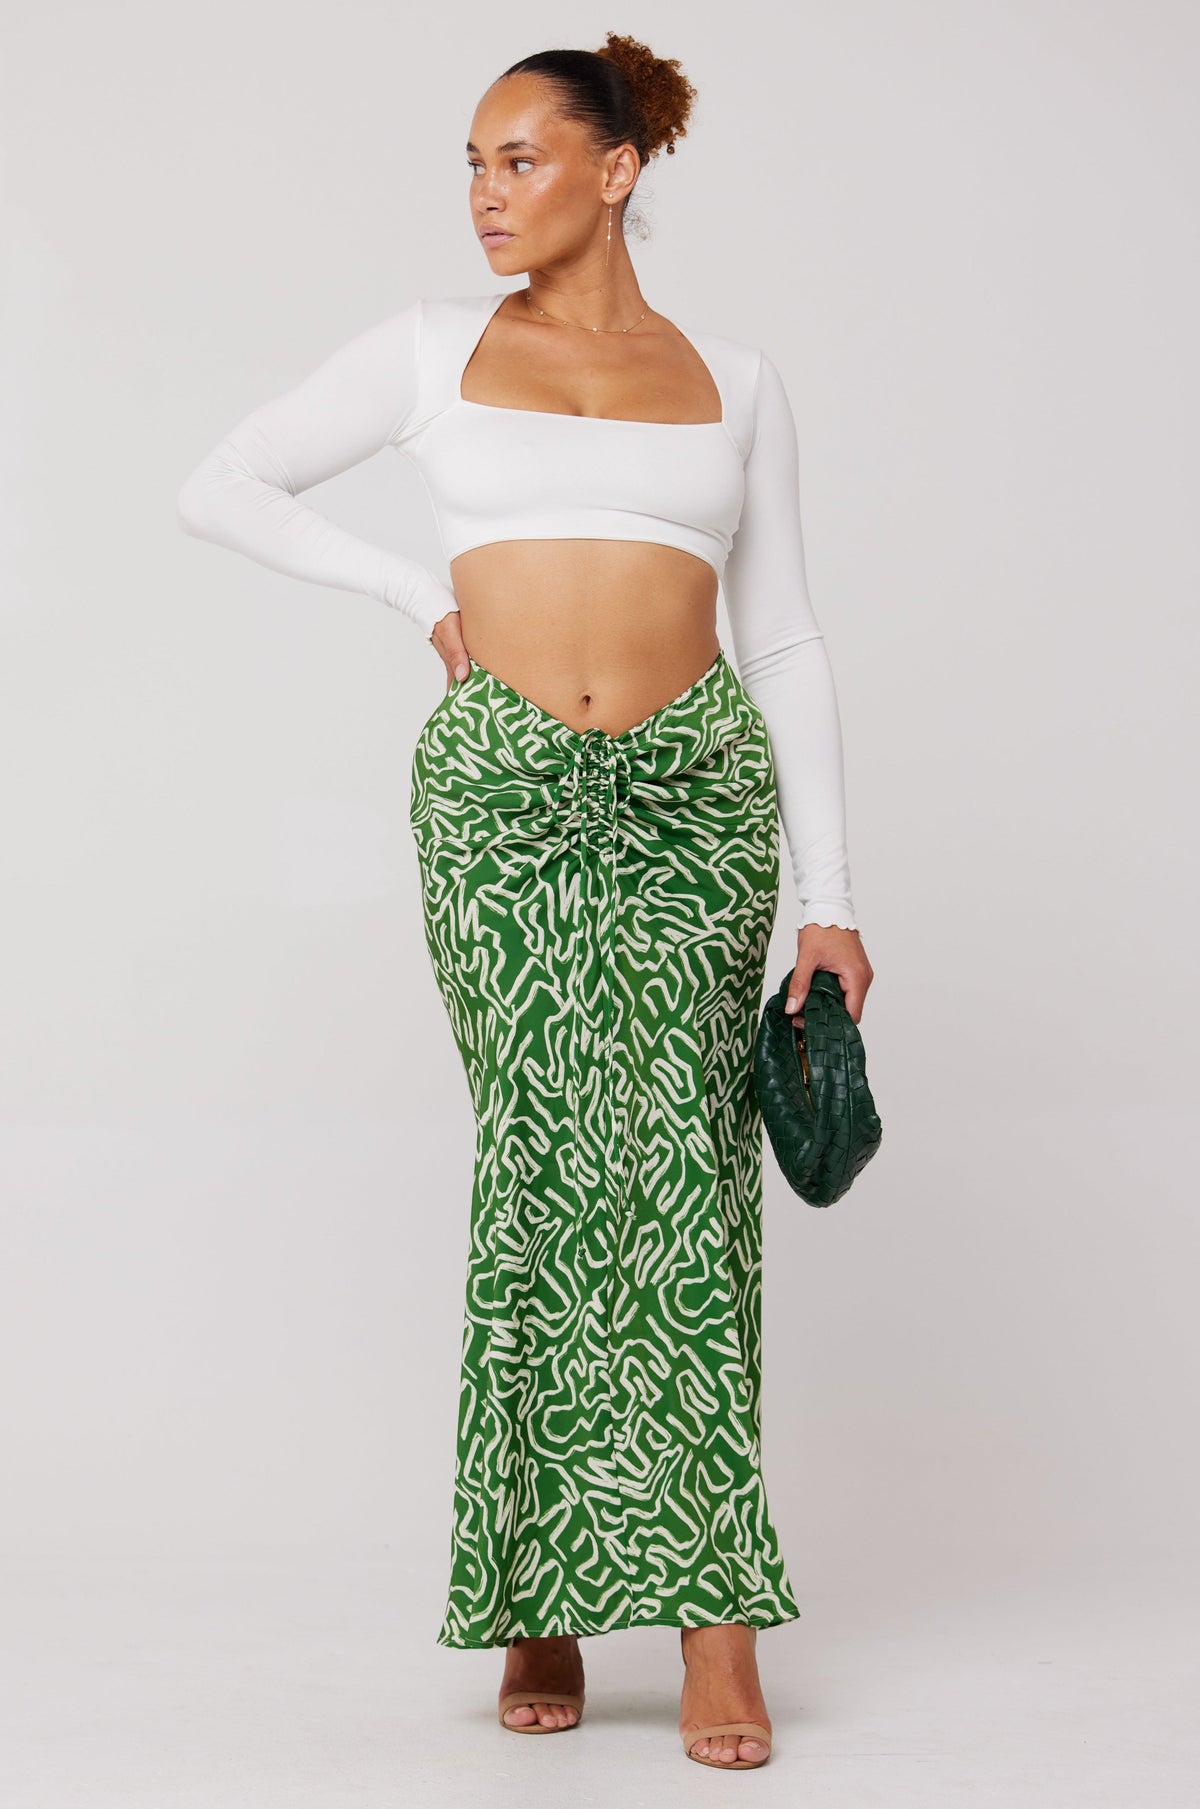 This is an image of Ziggy Skirt in Crayola - RESA featuring a model wearing the dress